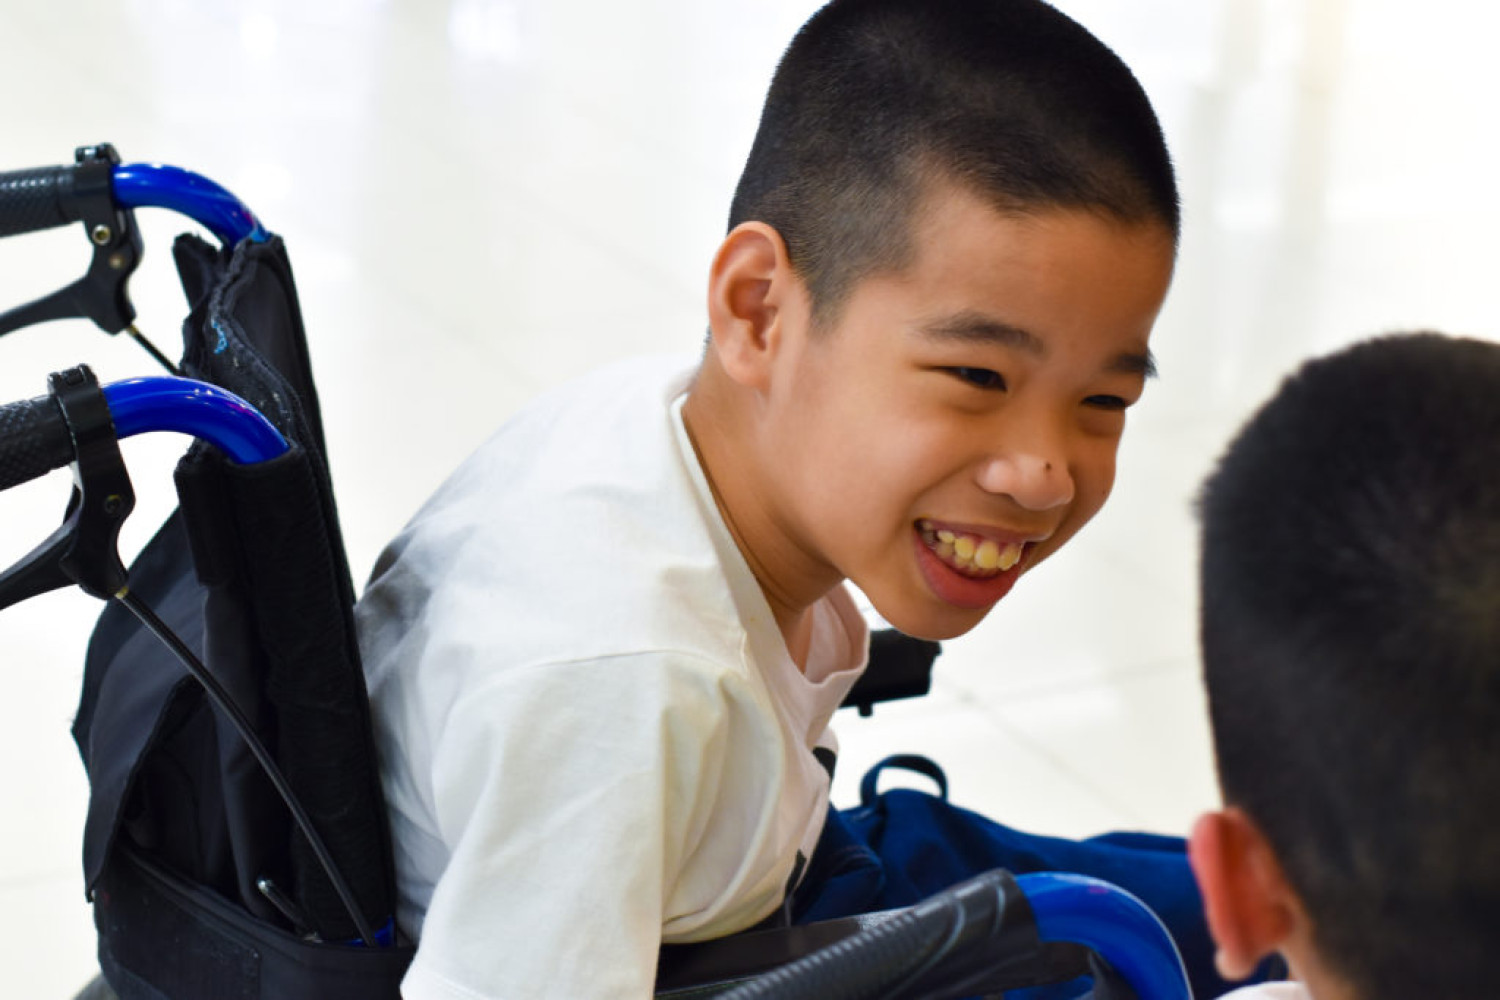 Young Asian boy in wheelchair smiling at friend - Support coordination for people with disabilities - Focus Care.